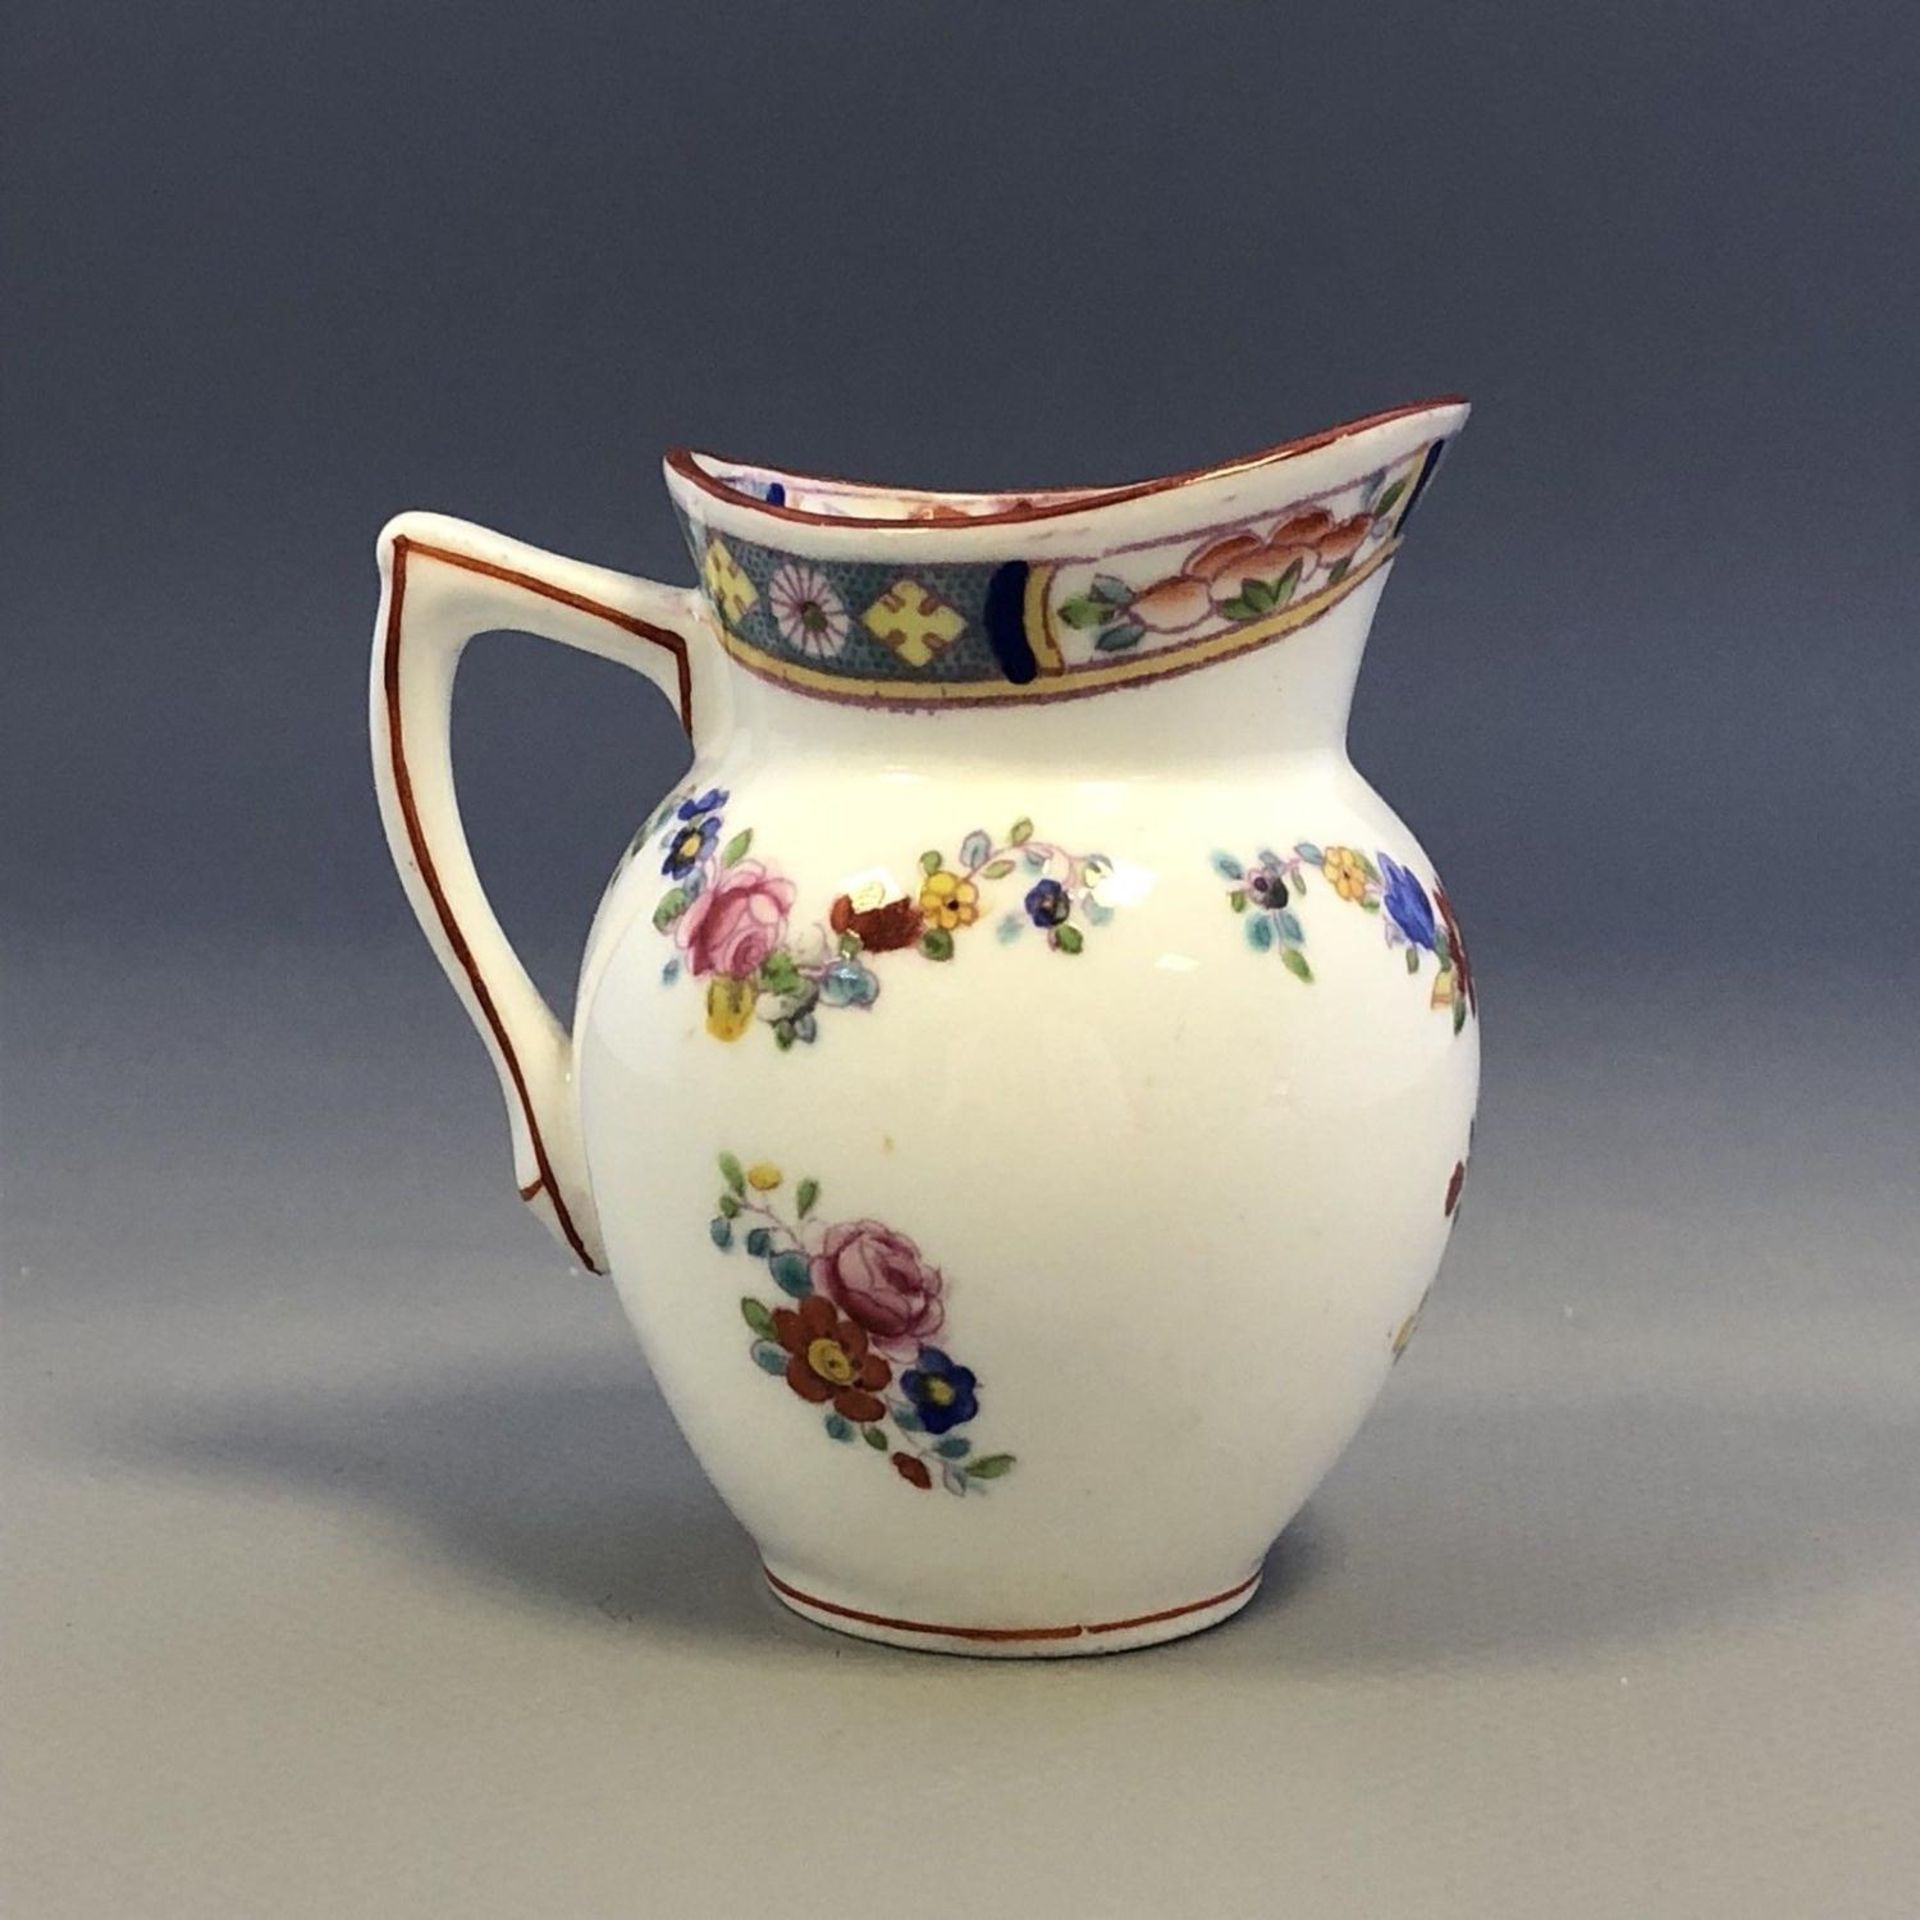 Minton porcelain small creamer cream jug dainty - Pretty Rose Floral Swags A4807 - Image 3 of 6